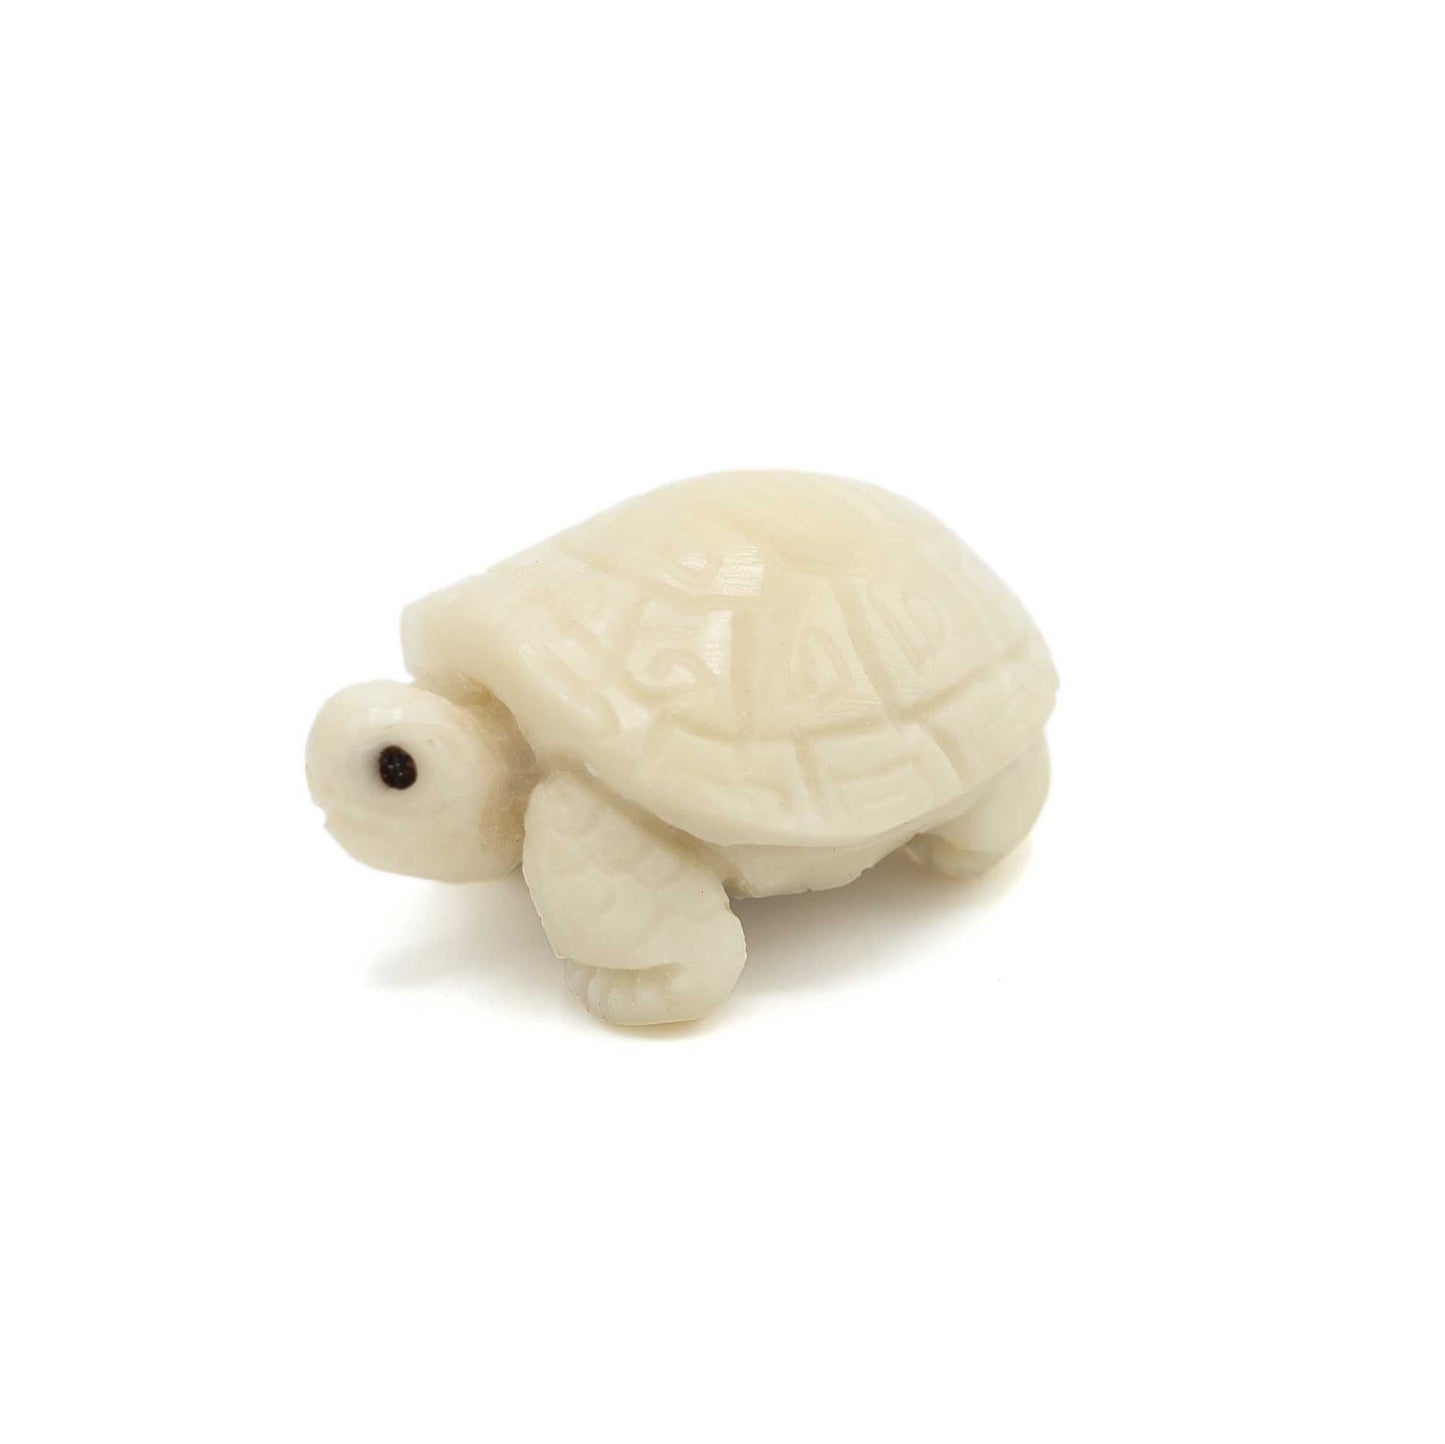 Tagua tortoise seen from the left.